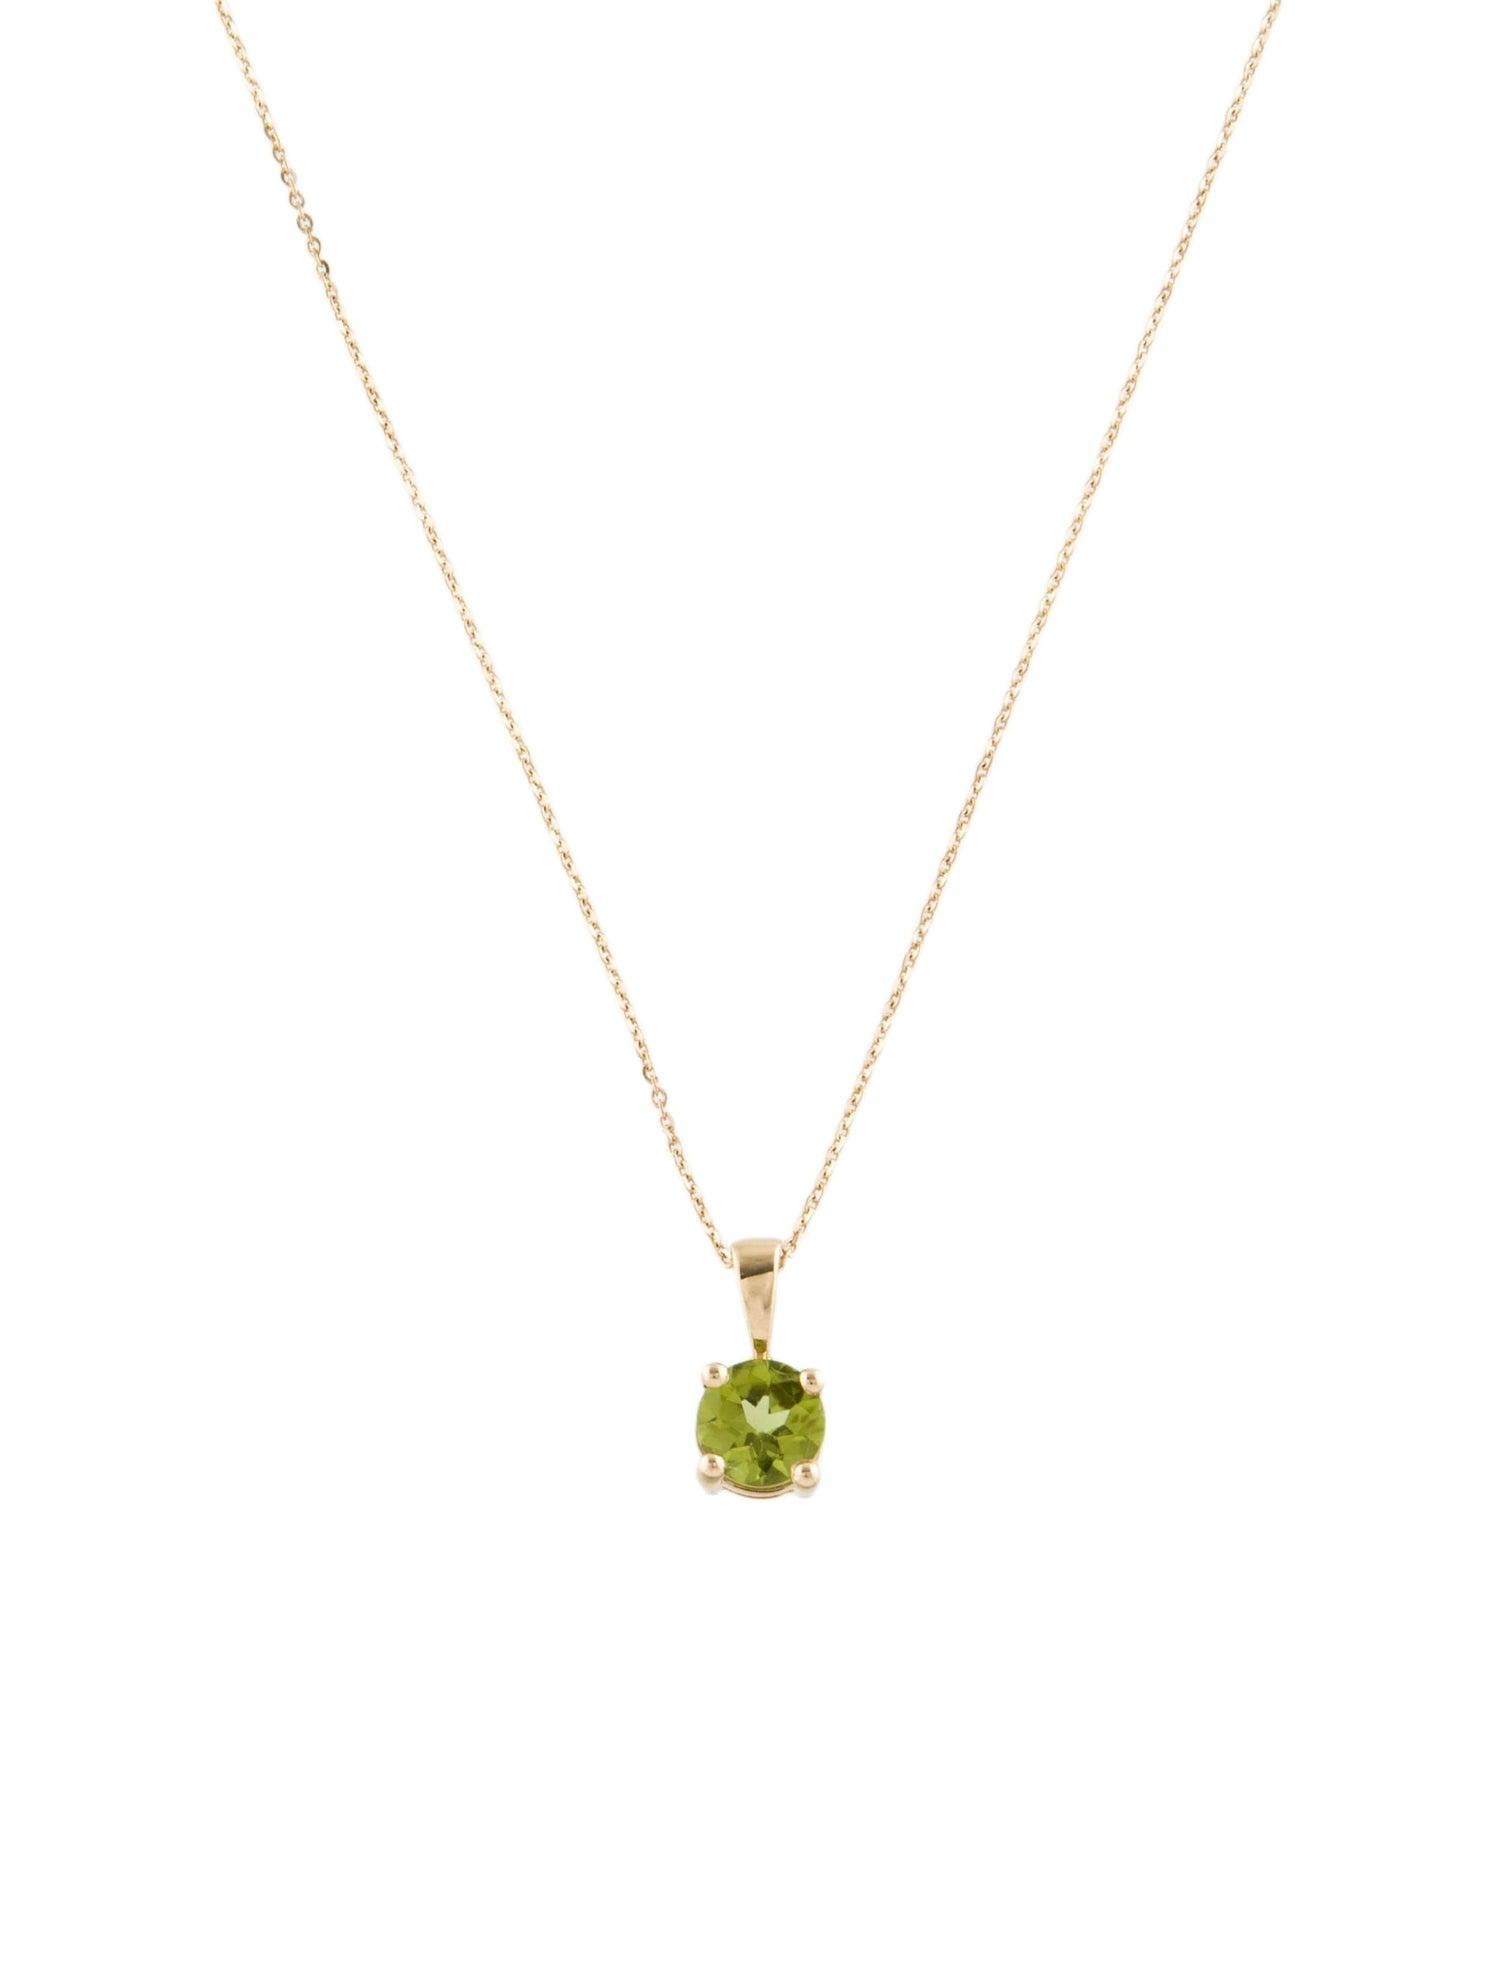 Introducing our exquisite 14K Yellow Gold Peridot Solitaire Pendant Necklace, a masterpiece of refined elegance. This captivating piece features a stunning 1.05 carat round modified brilliant peridot, radiating vibrant green hues that symbolize